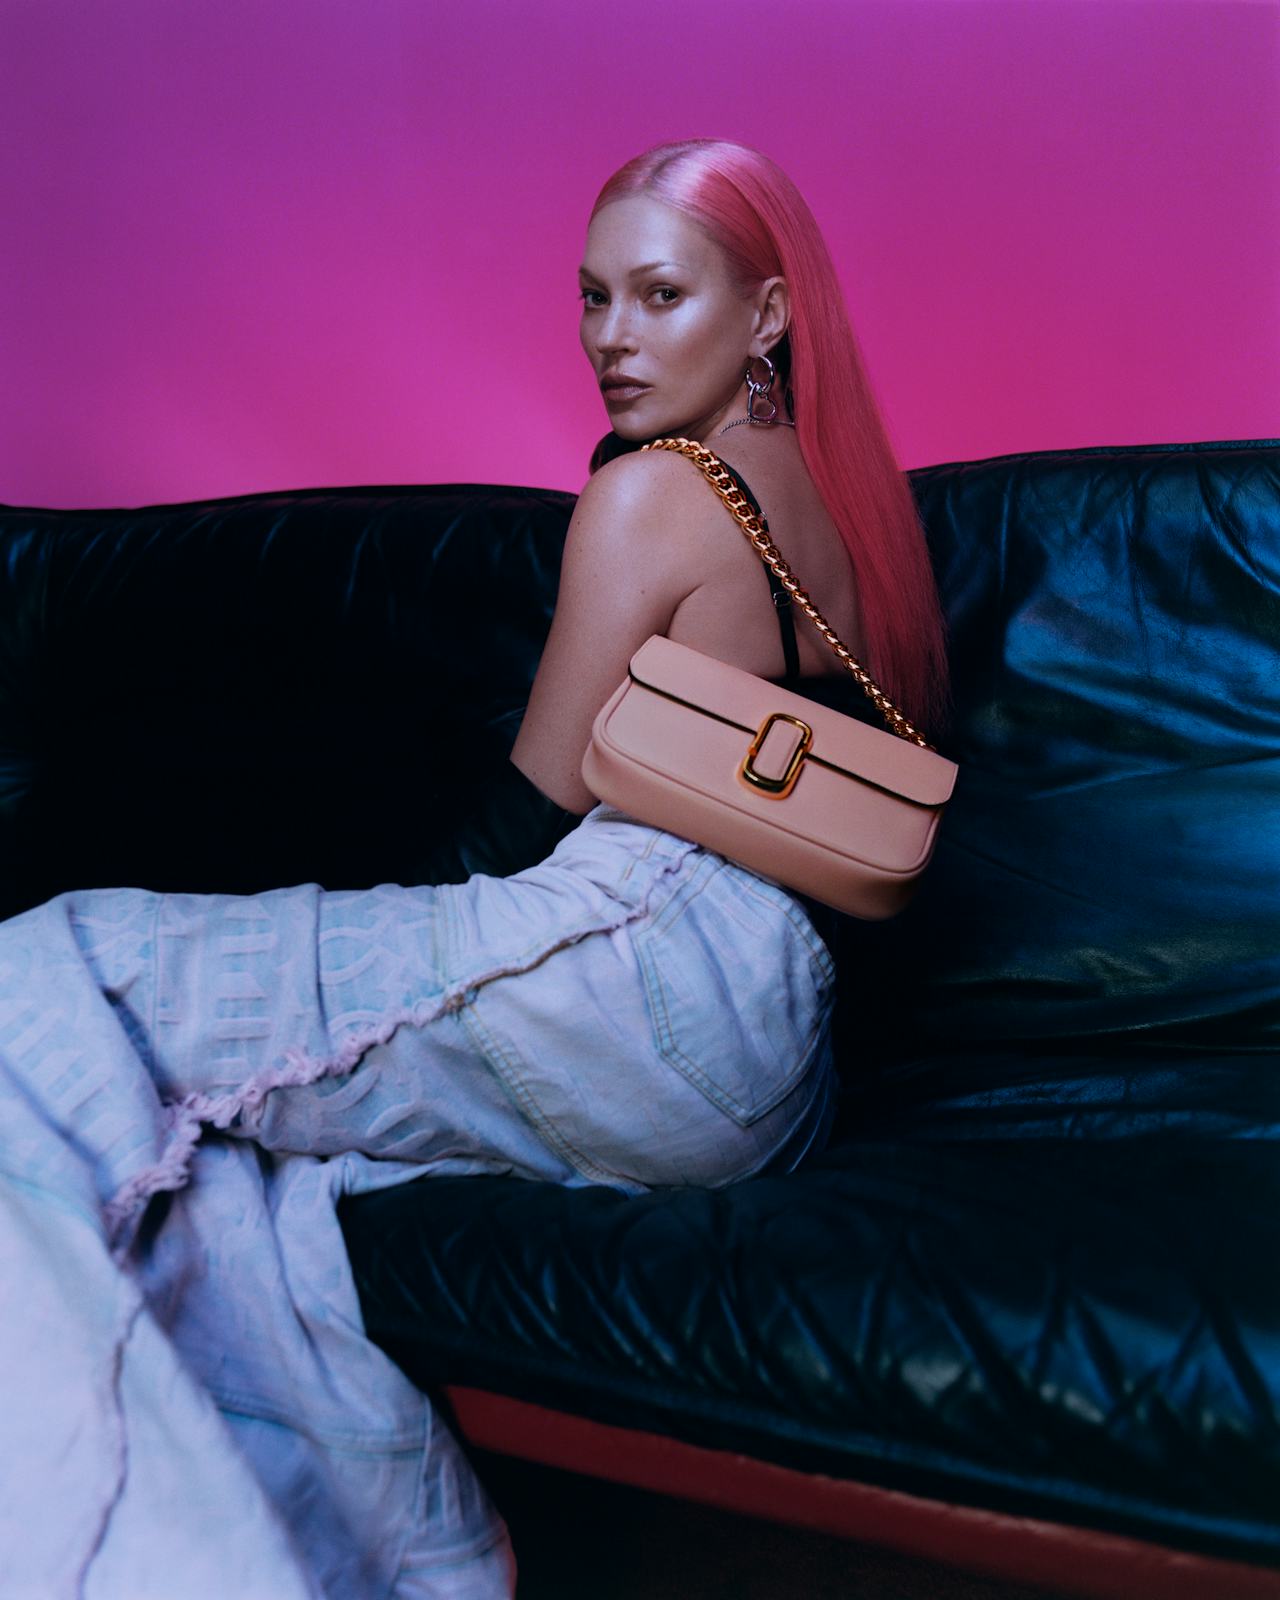 Kate Moss Shines In Marc Jacobs' Resort 2022/2023 Campaign